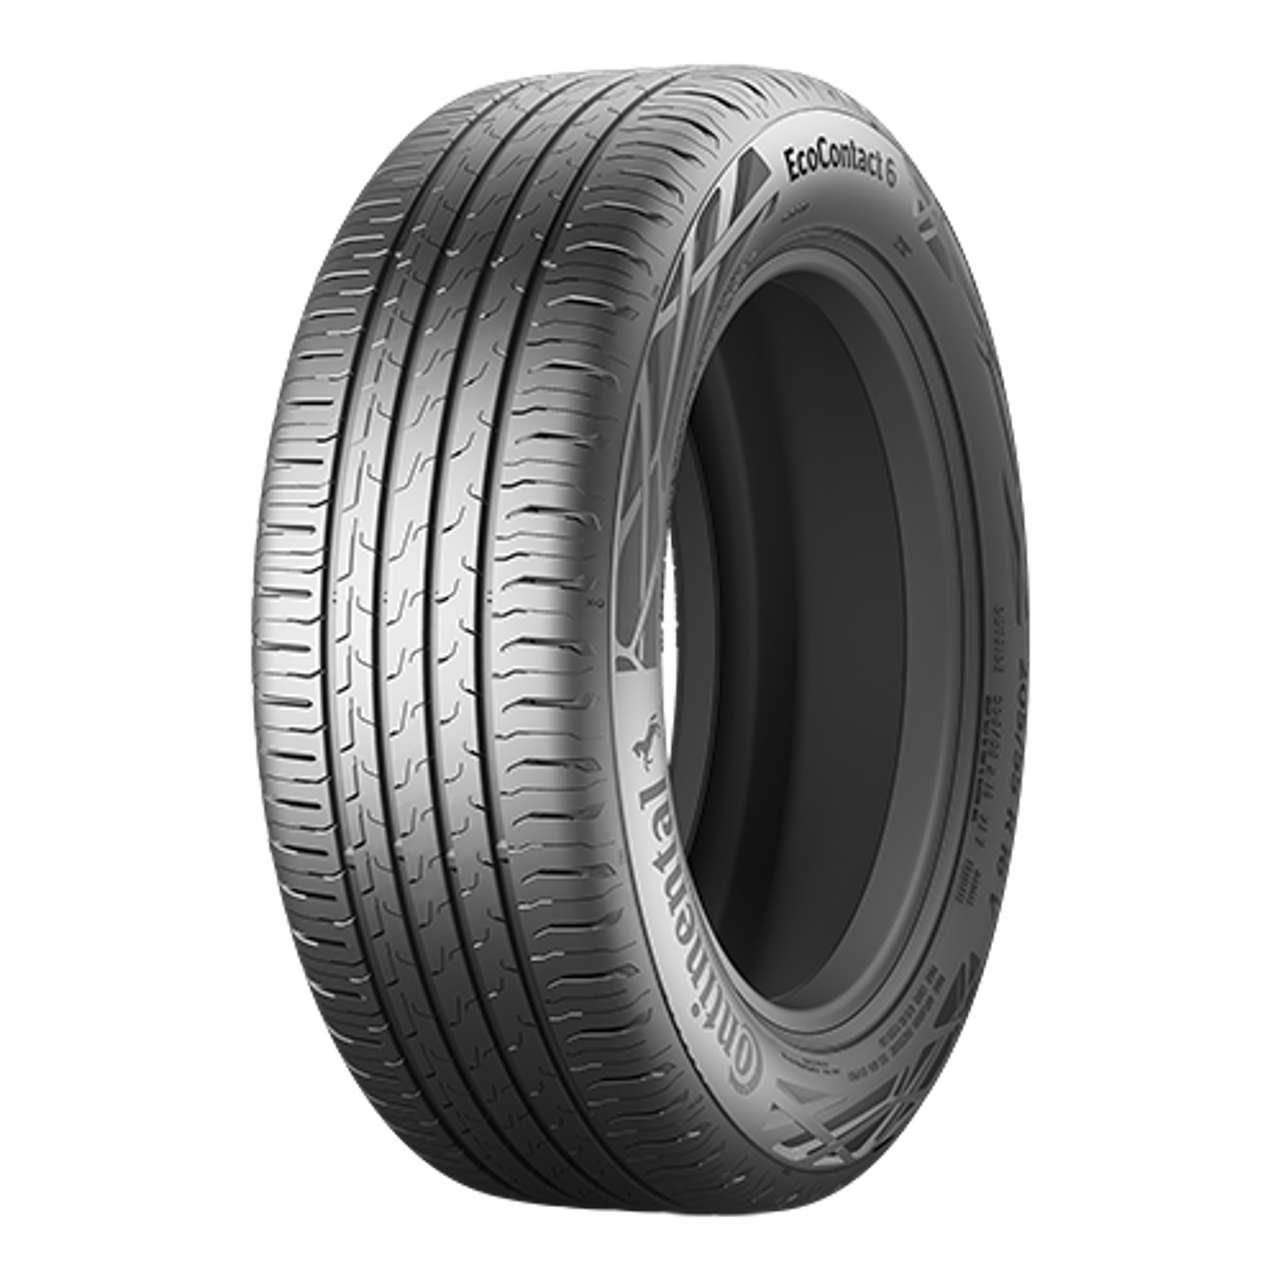 CONTINENTAL ECOCONTACT 6Q (*) (MO) (EVc) 275/30R21 98Y BSW XL